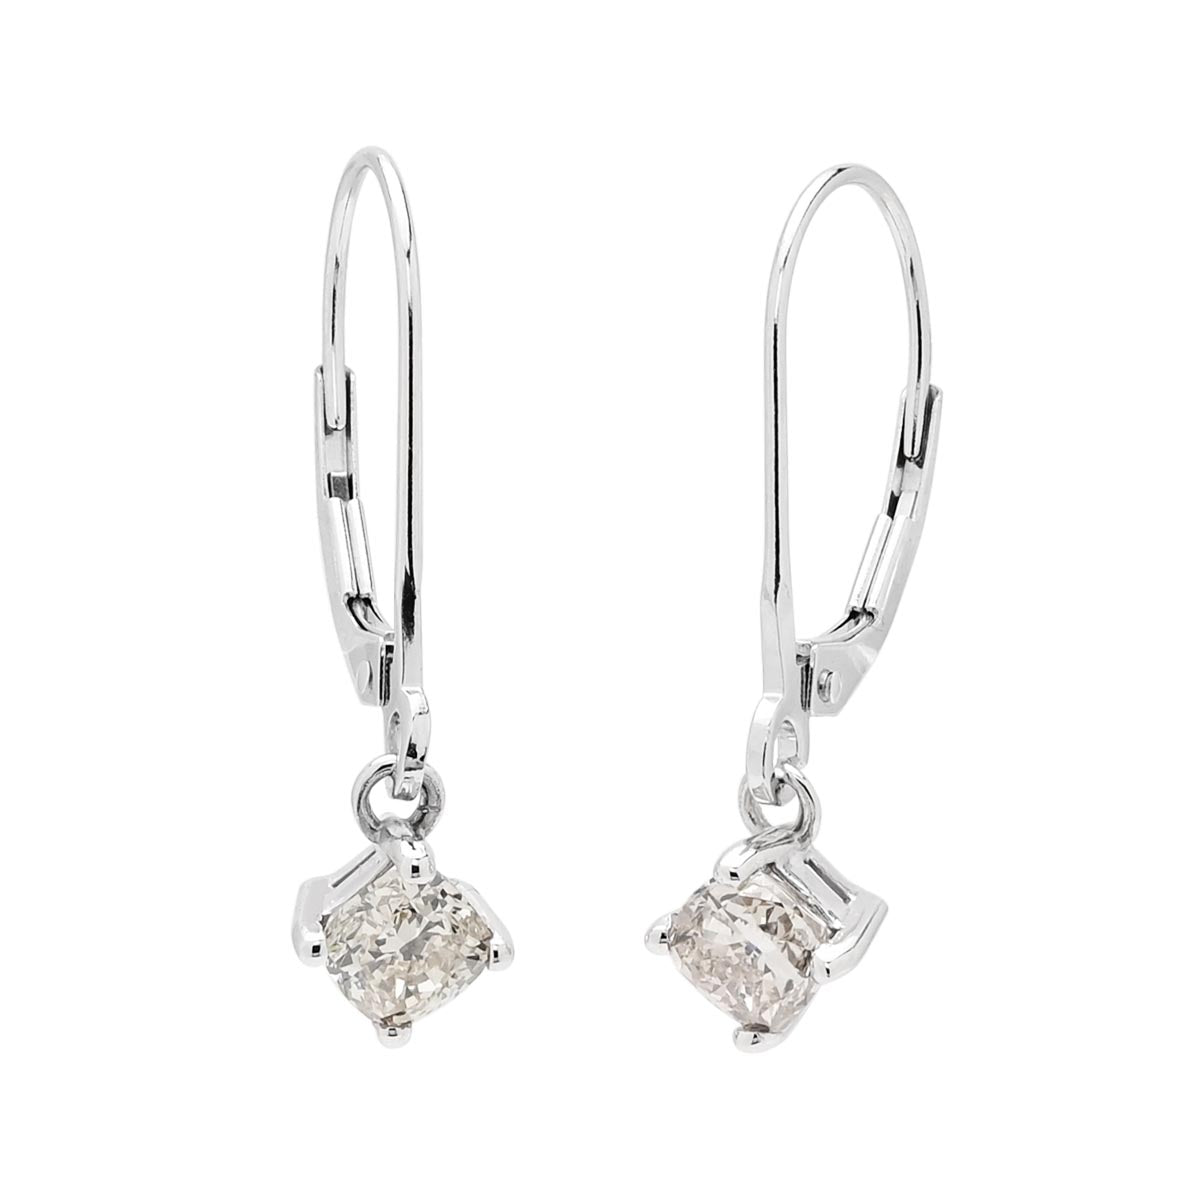 Cushion Cut Champagne Diamond Earrings in 14kt White Gold (1ct tw)